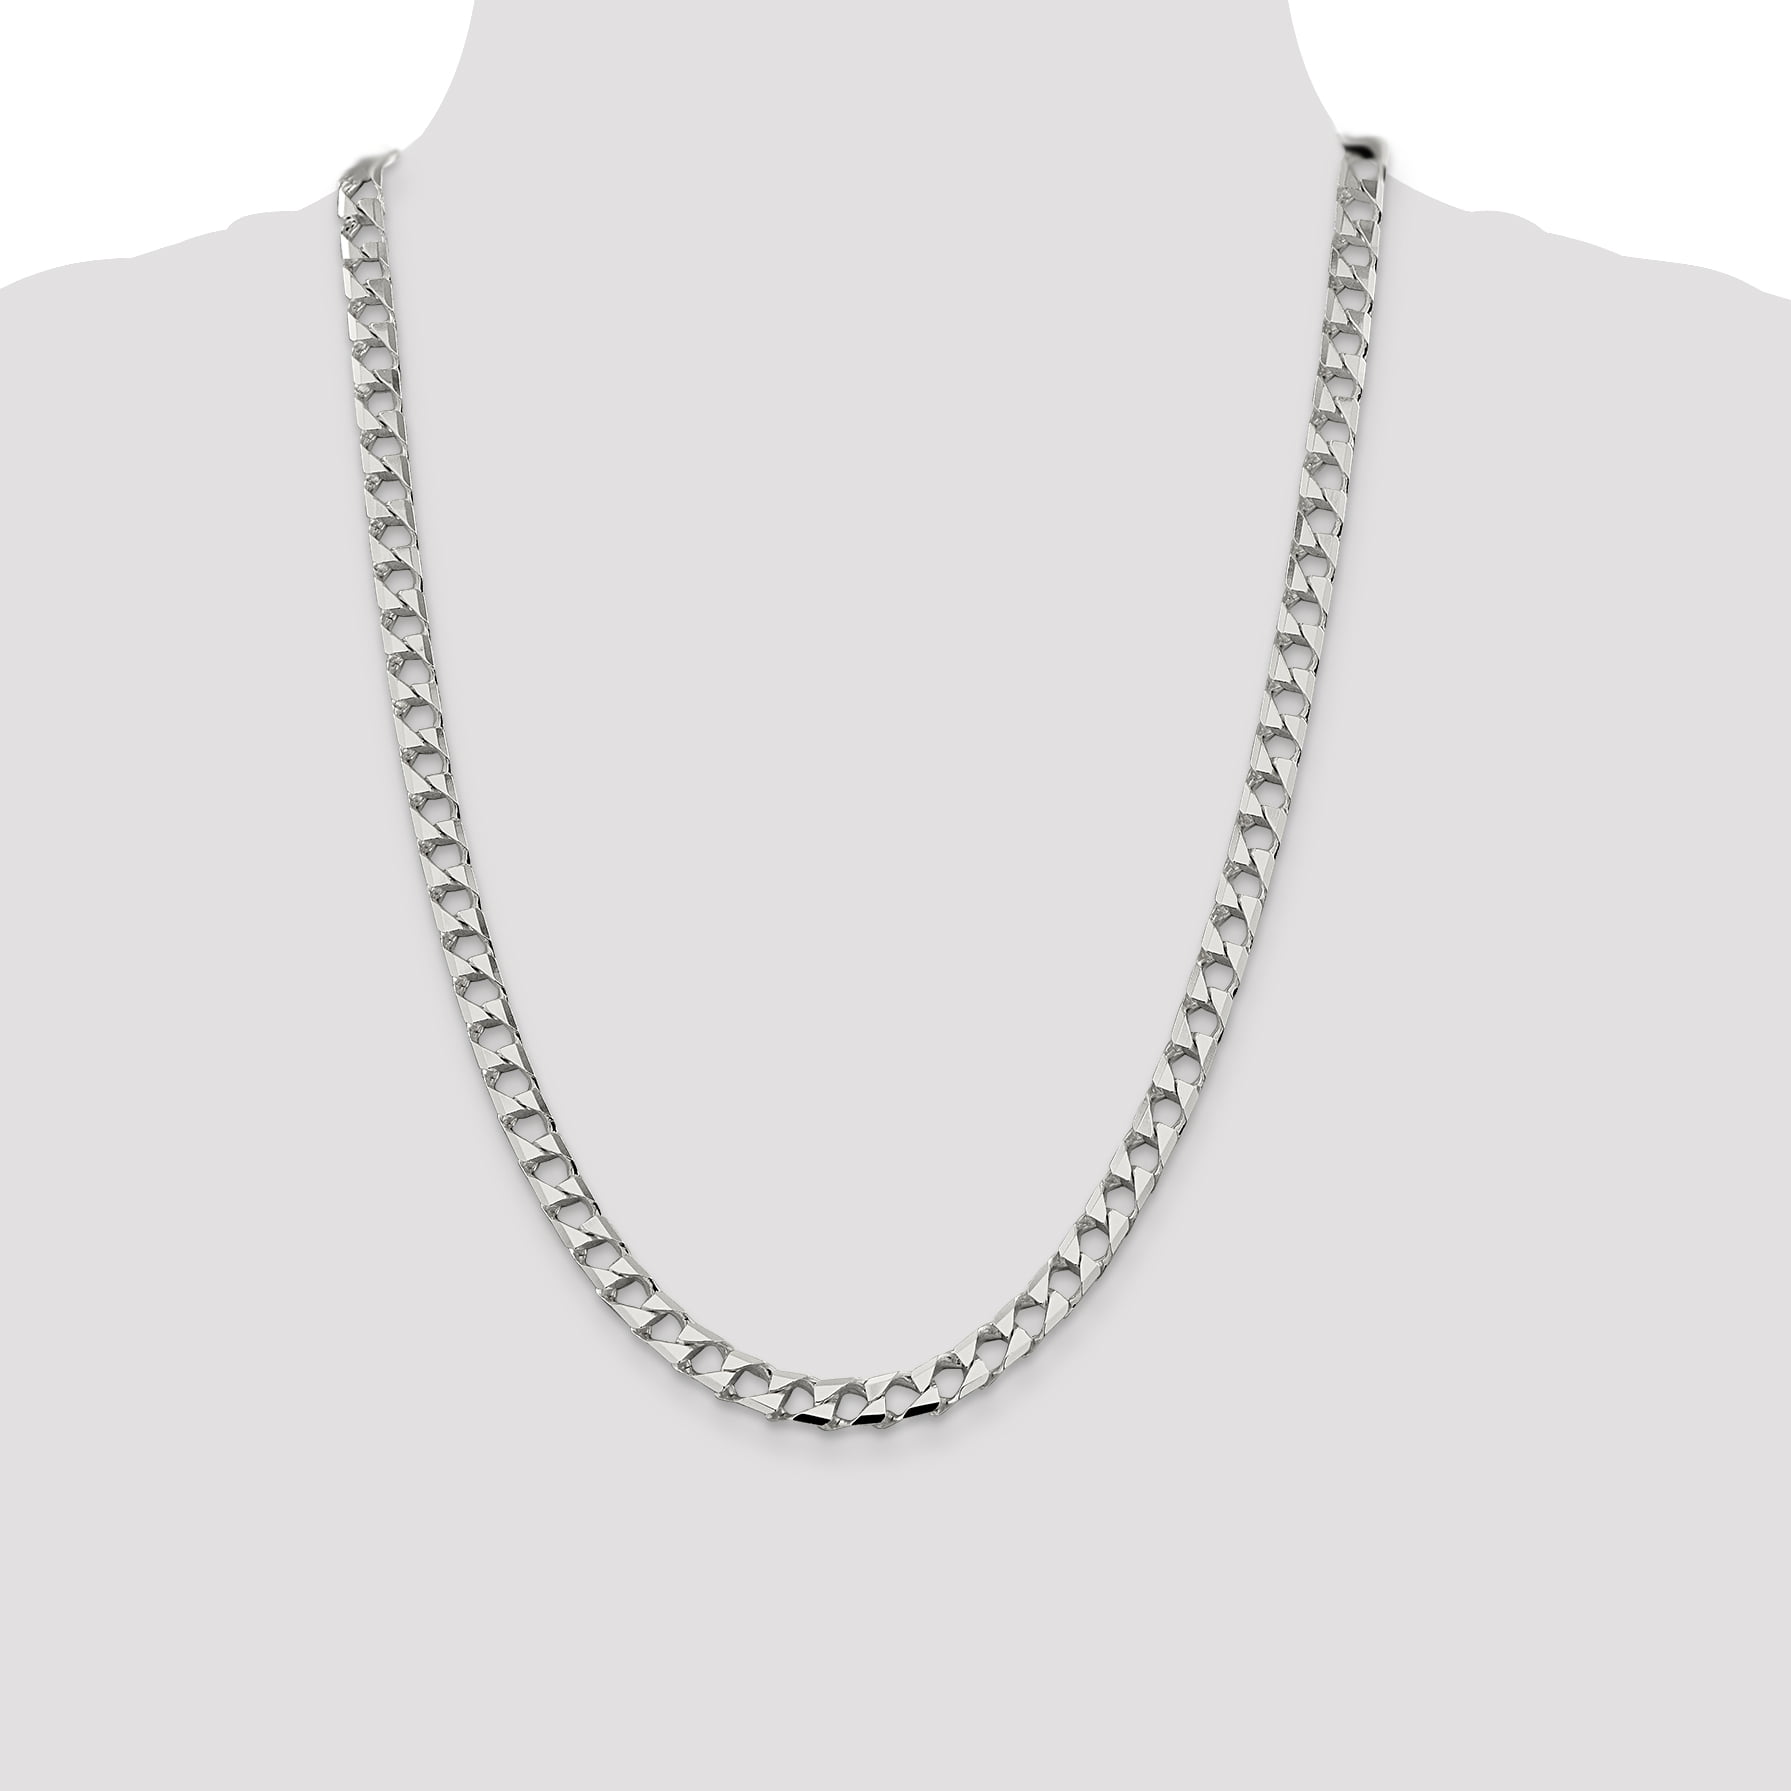 925 Sterling Silver 24" 4mm SQUARE Curb Link Chain Necklace 24inch chain